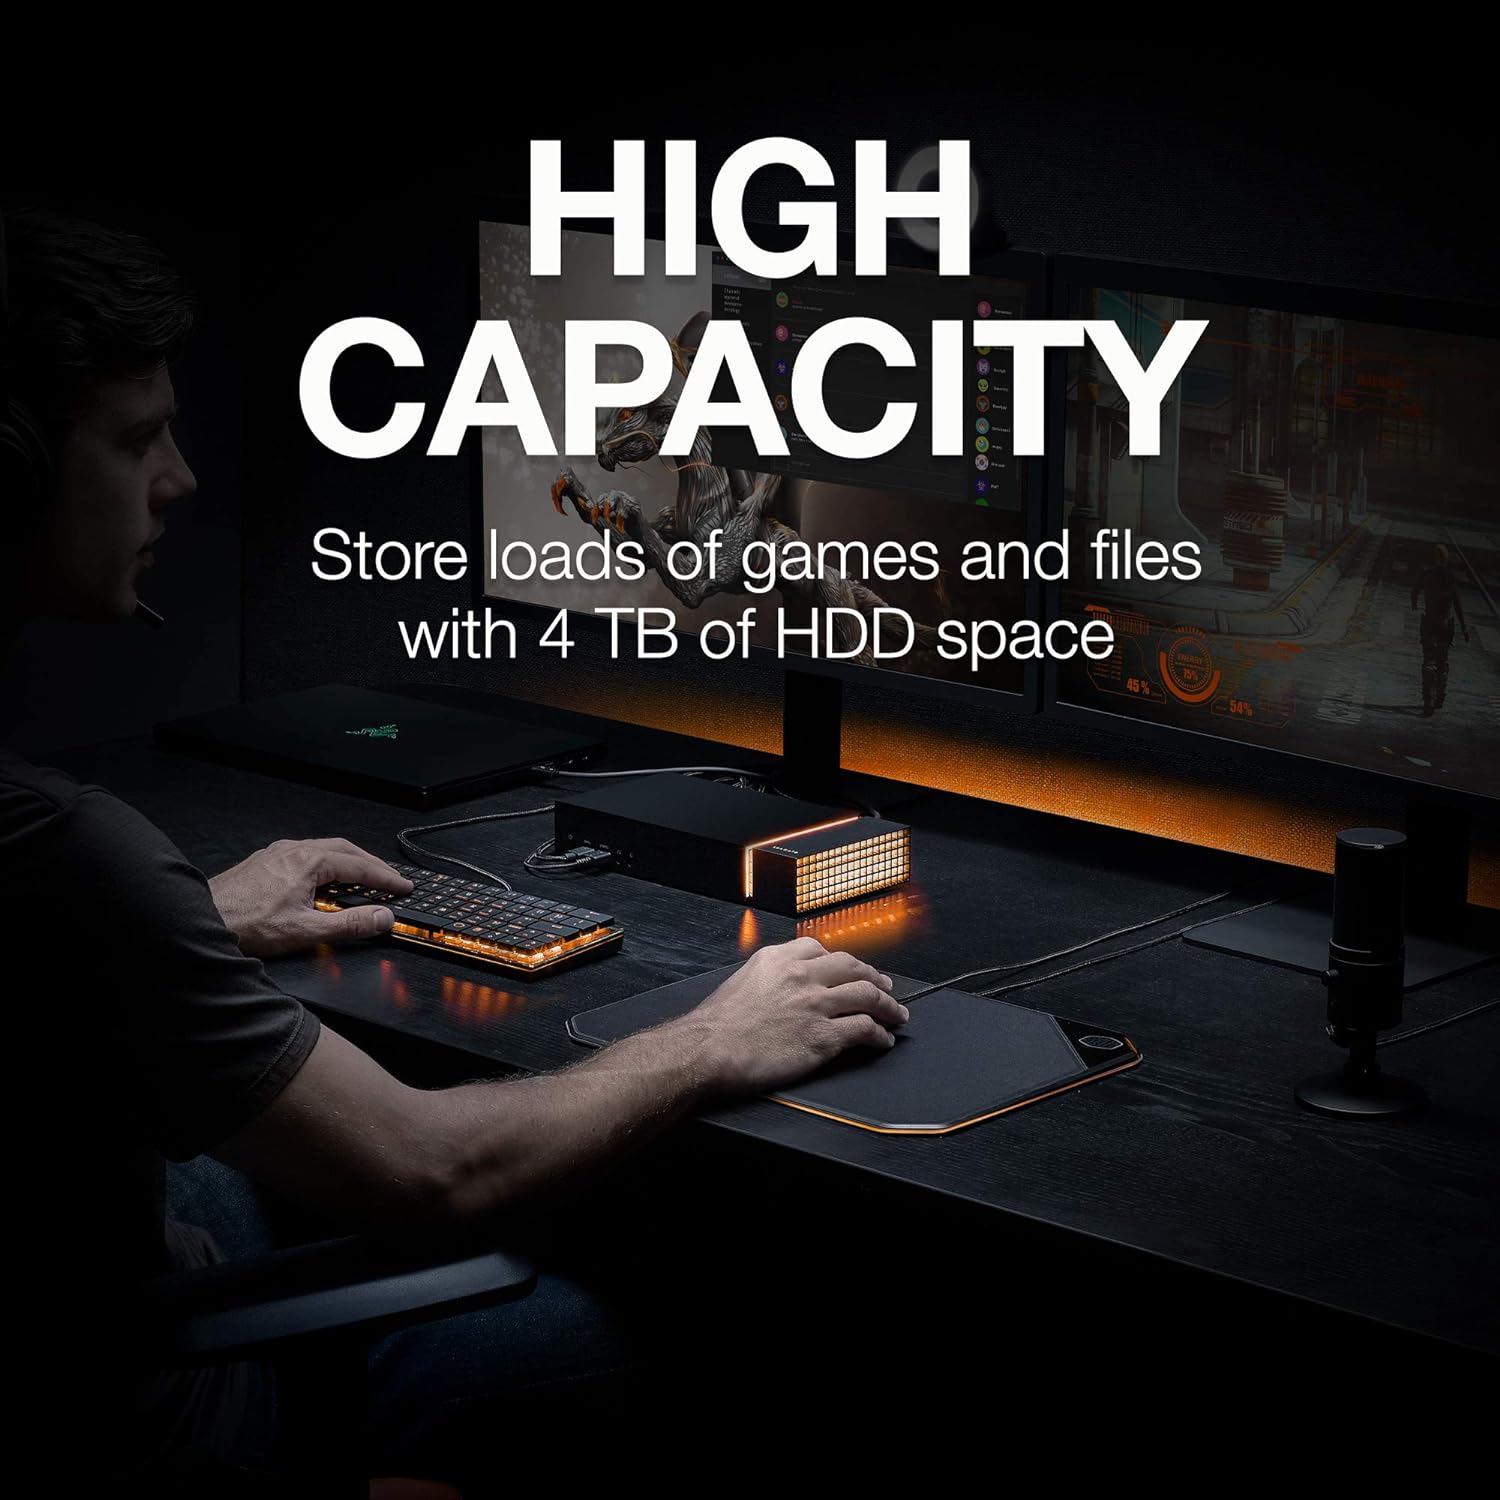 Seagate Firecuda Gaming dock 4TB HDD storage built-in; Expandable M/2 NVMe SSD Slot; Single Thunderbolt 3 connection